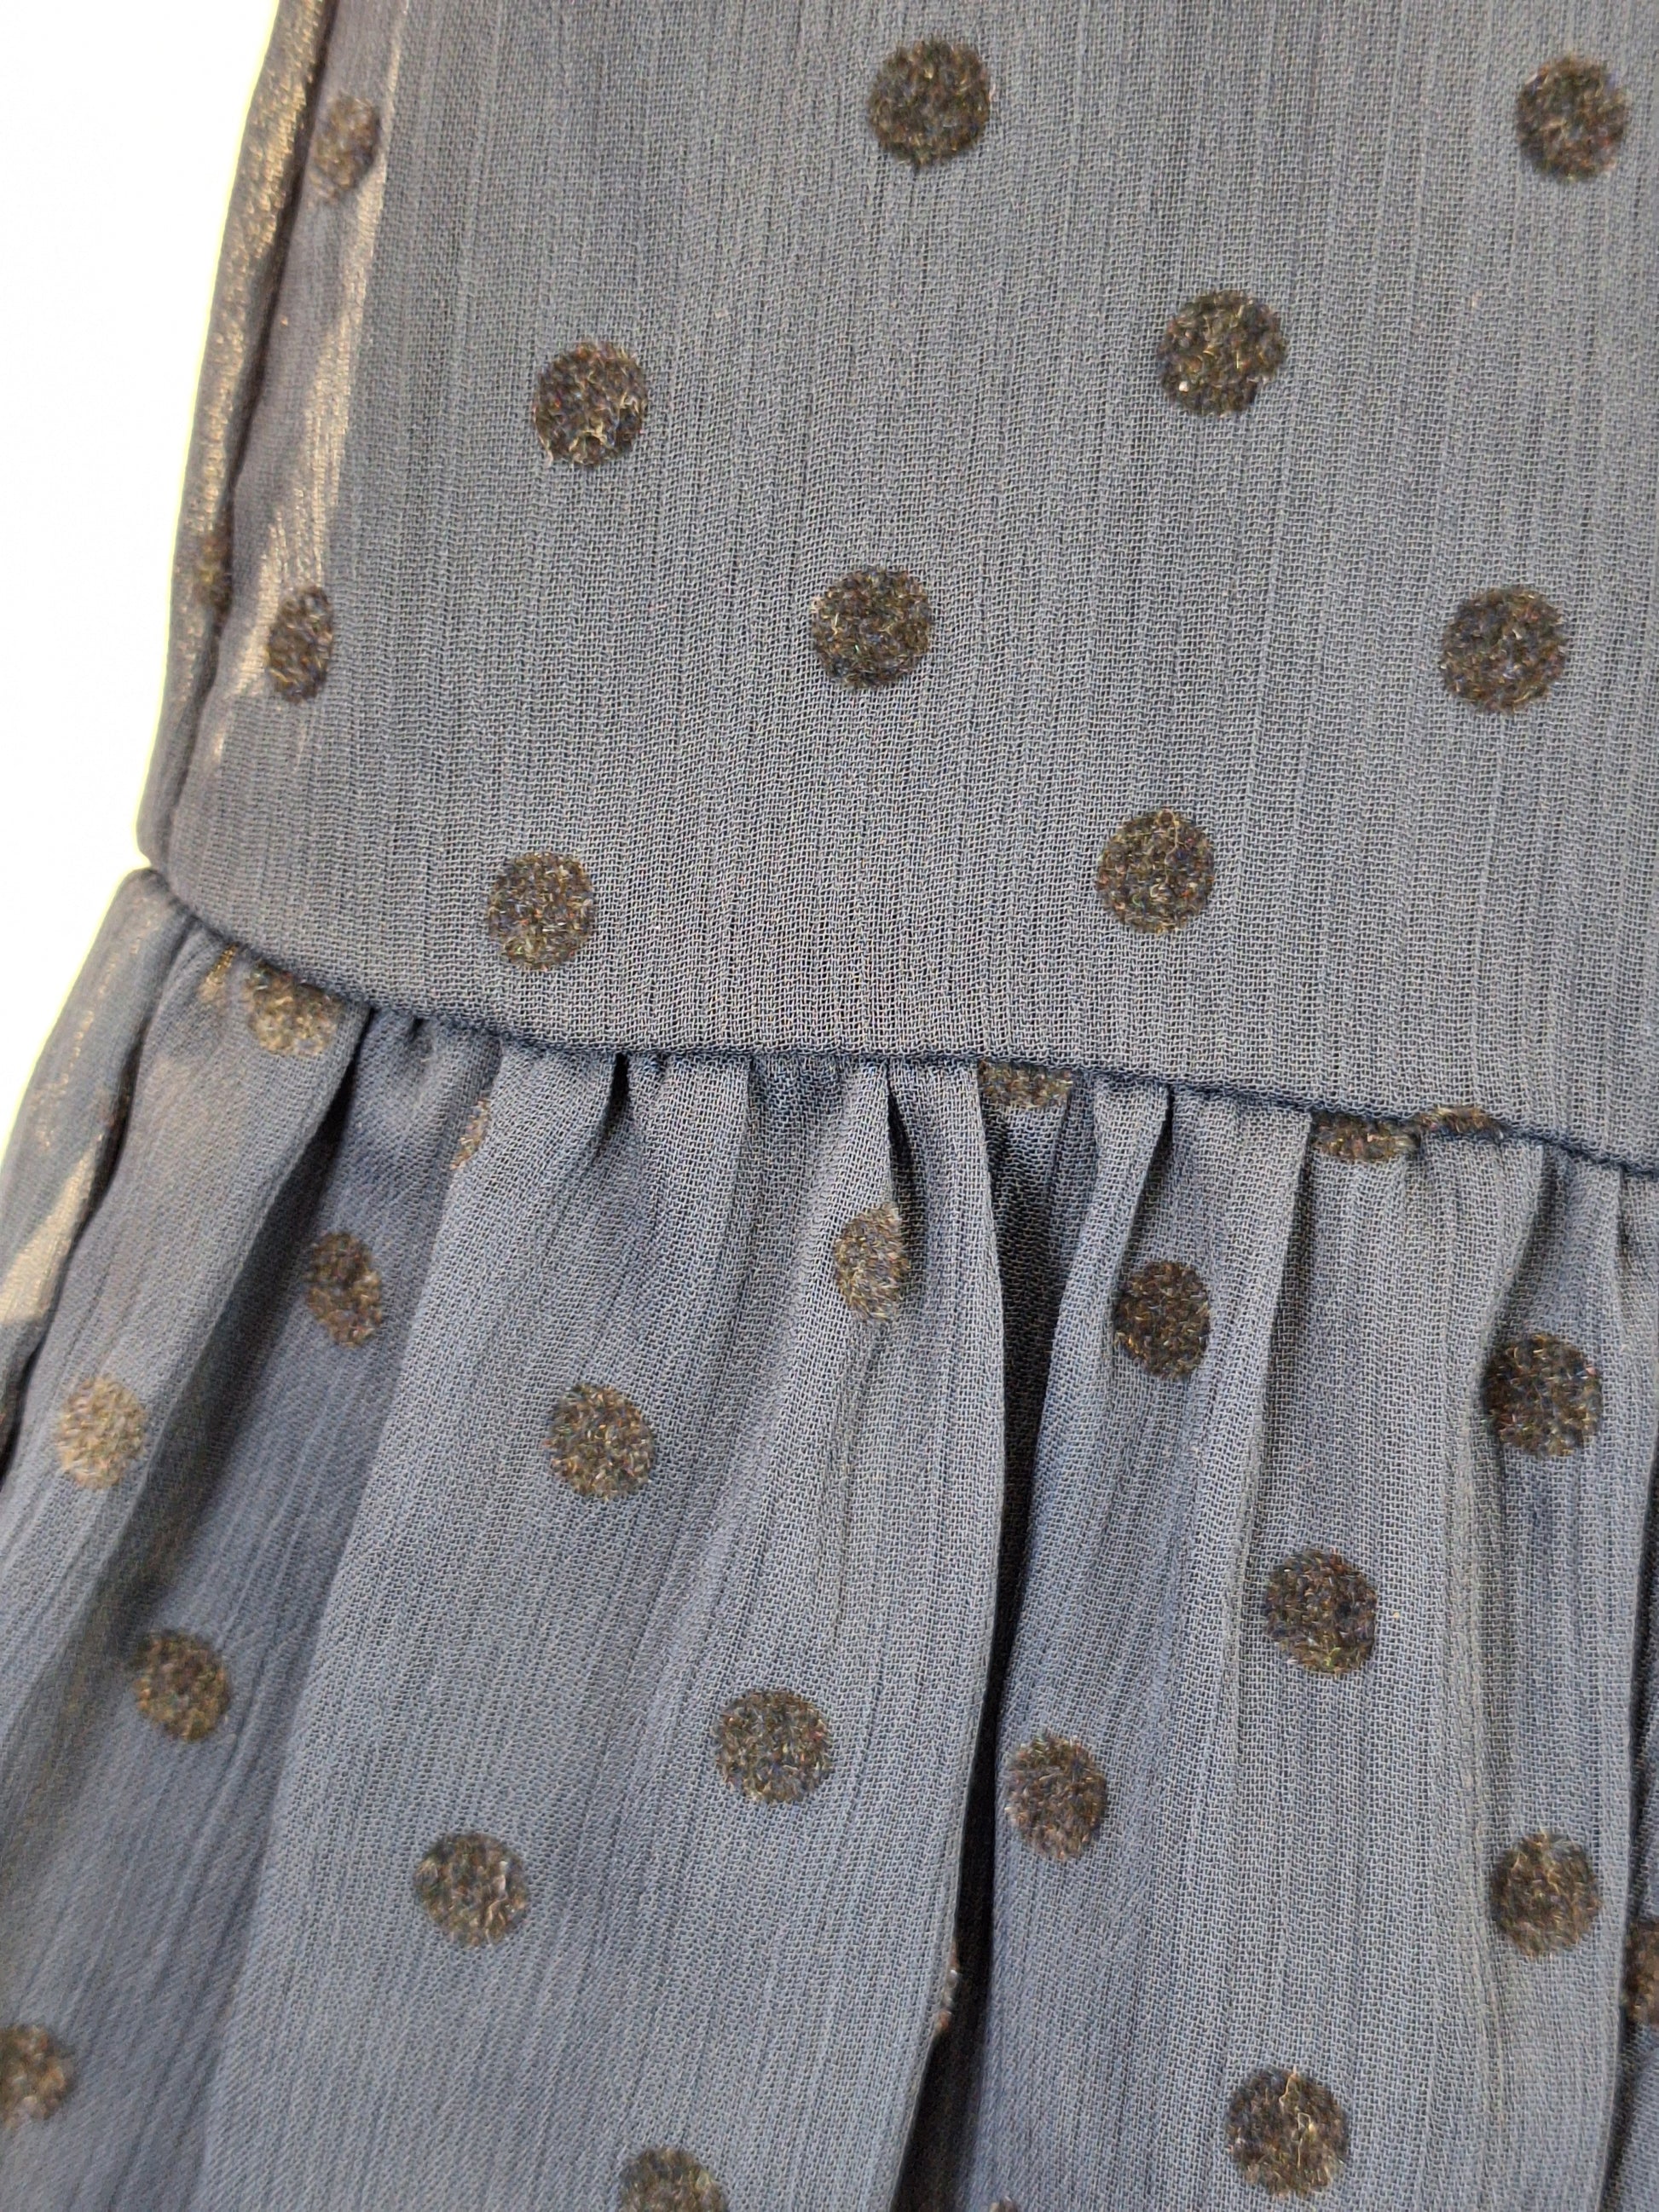 Liz Jordan Classic Polka Dot Tiered Midi Skirt Size 8 by SwapUp-Online Second Hand Store-Online Thrift Store